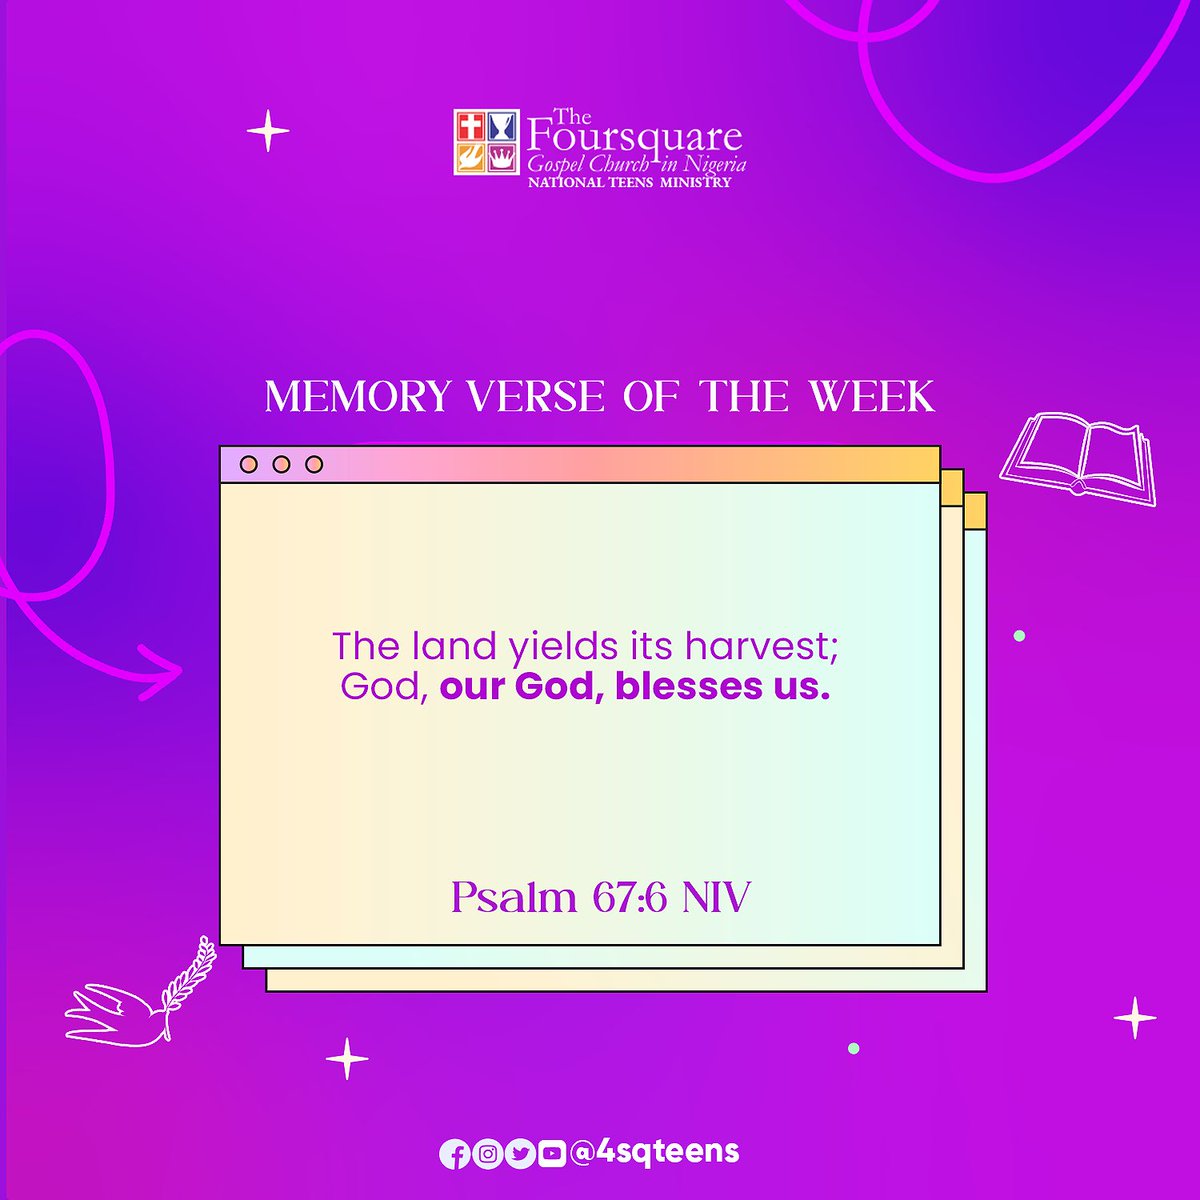 It’s our season of all-round blessings, and everything is yielding to God’s desire for us.

#4sqteens #memoryverse #verseoftheweek #allroundblessings